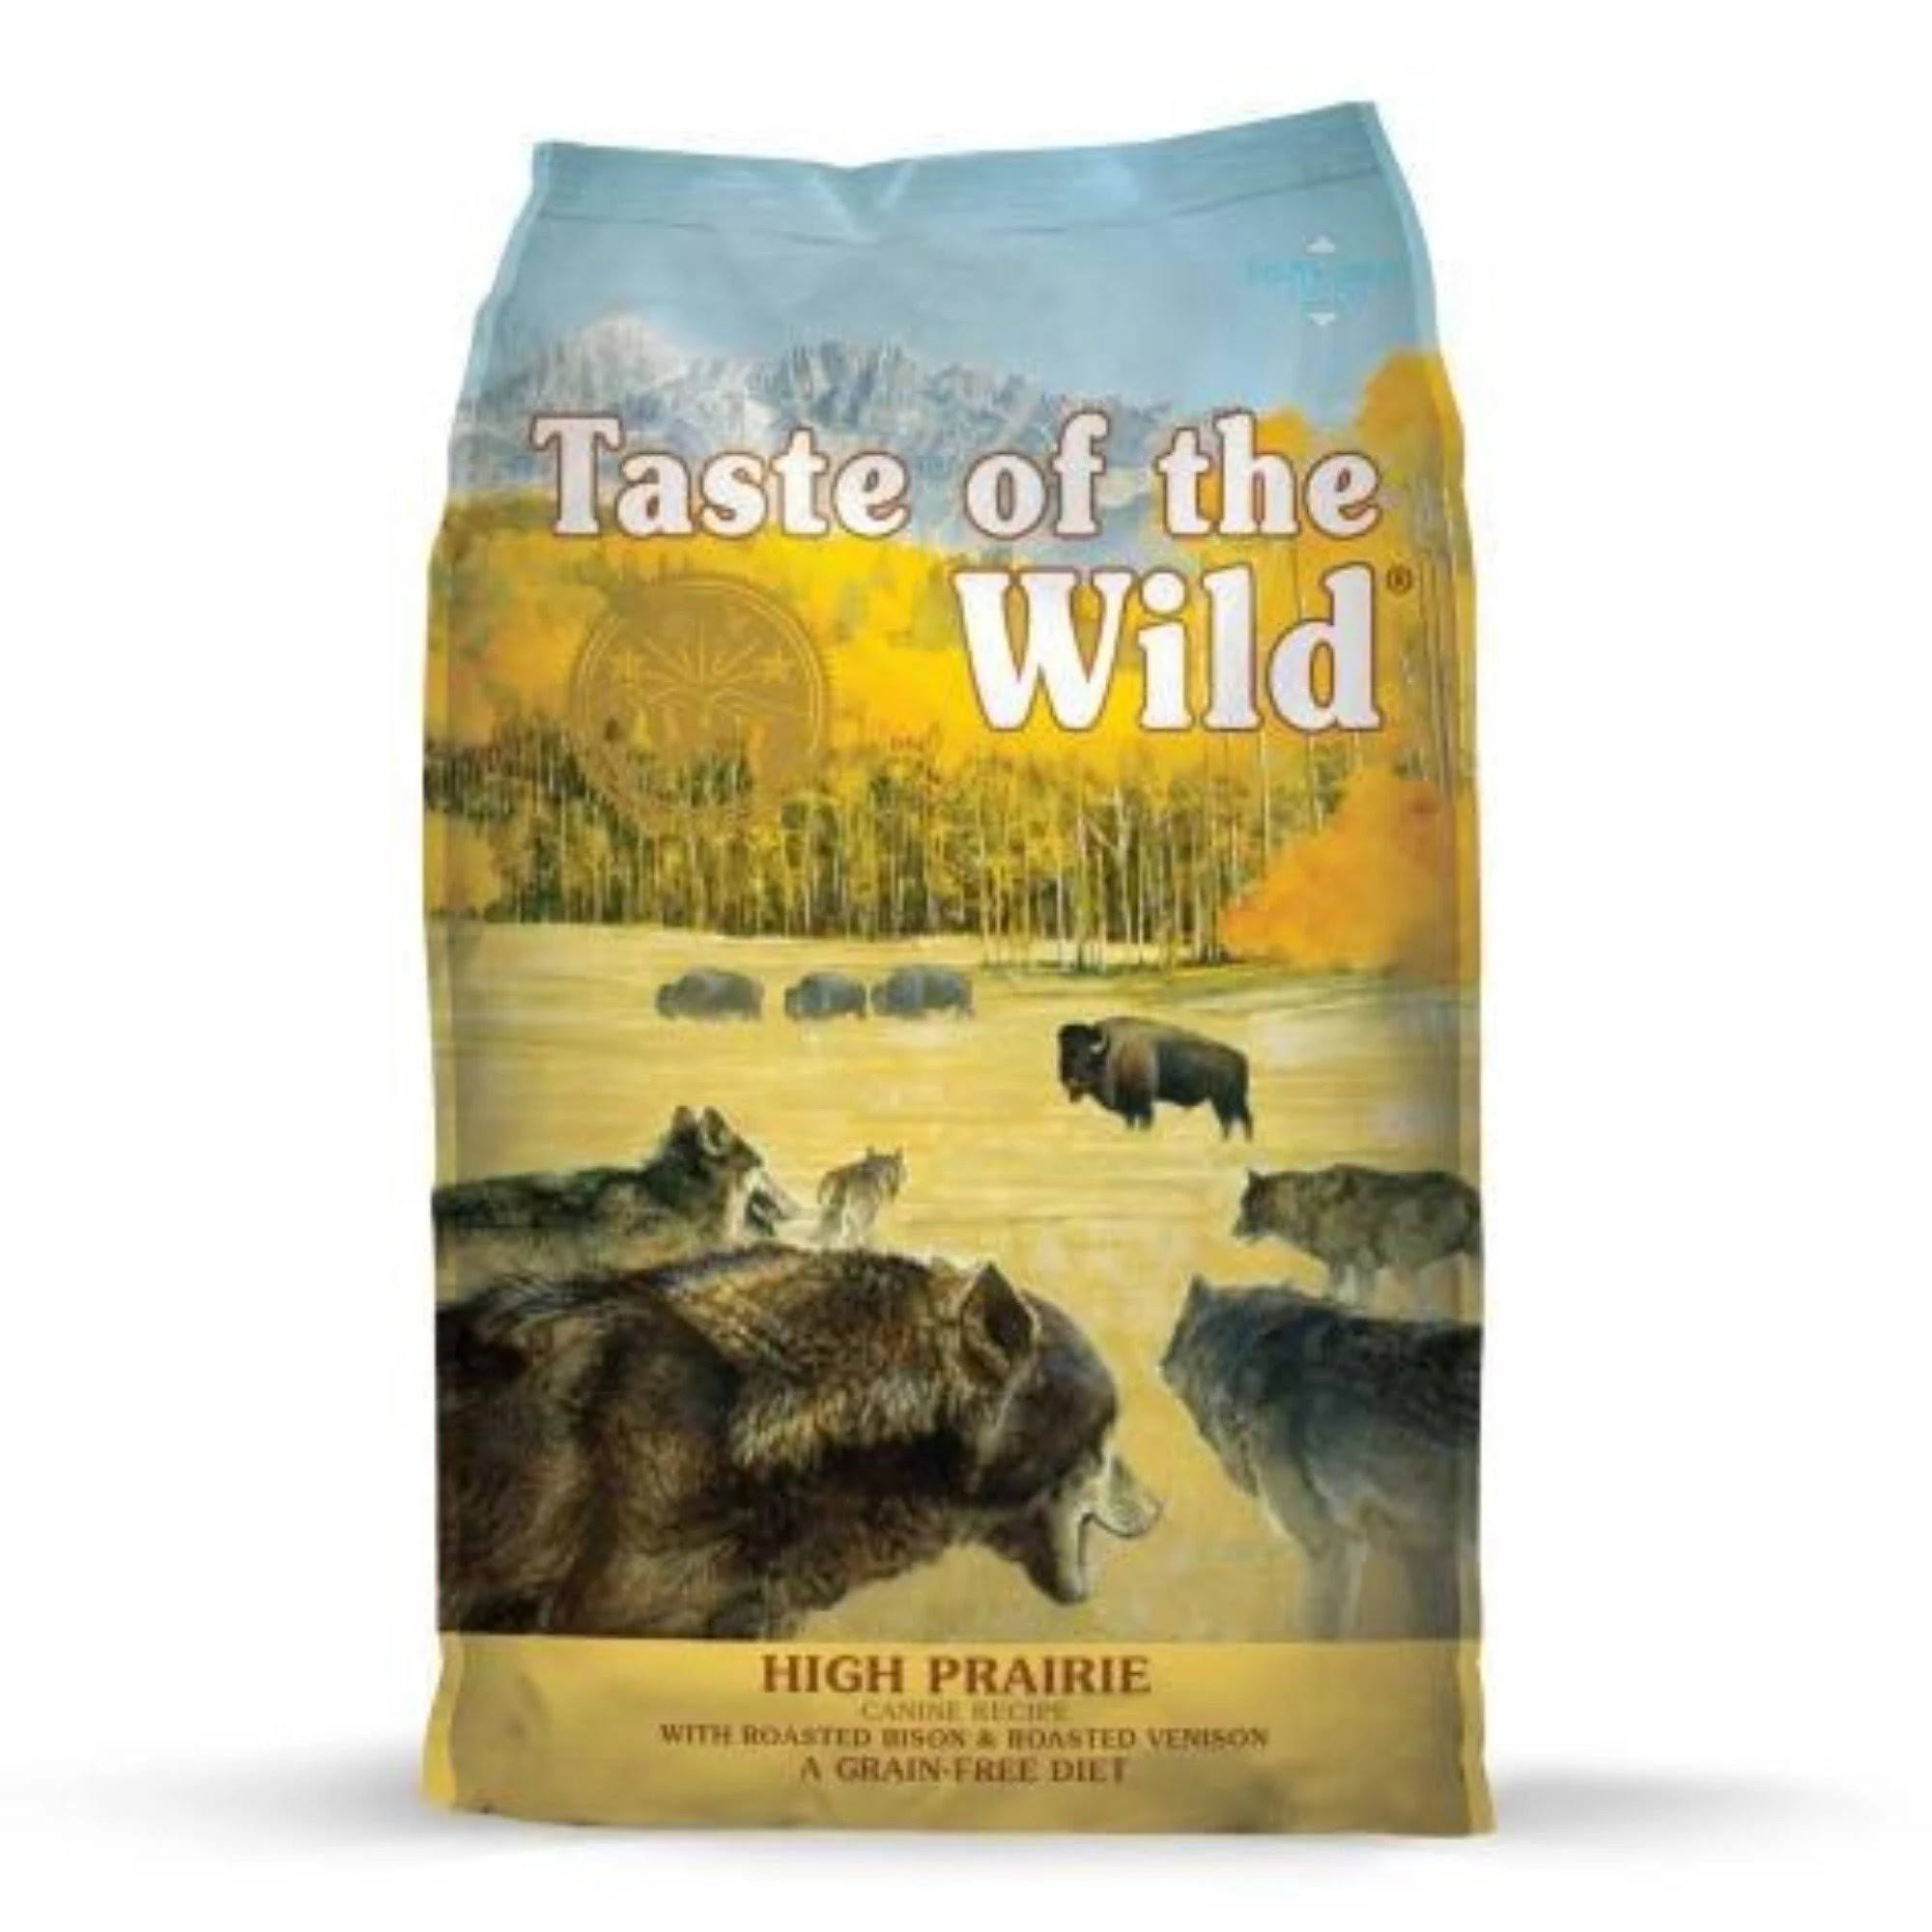 Taste of The Wild 9567 Canine Recipe with Roasted Bison Dry Dog Food - 28lb Bag